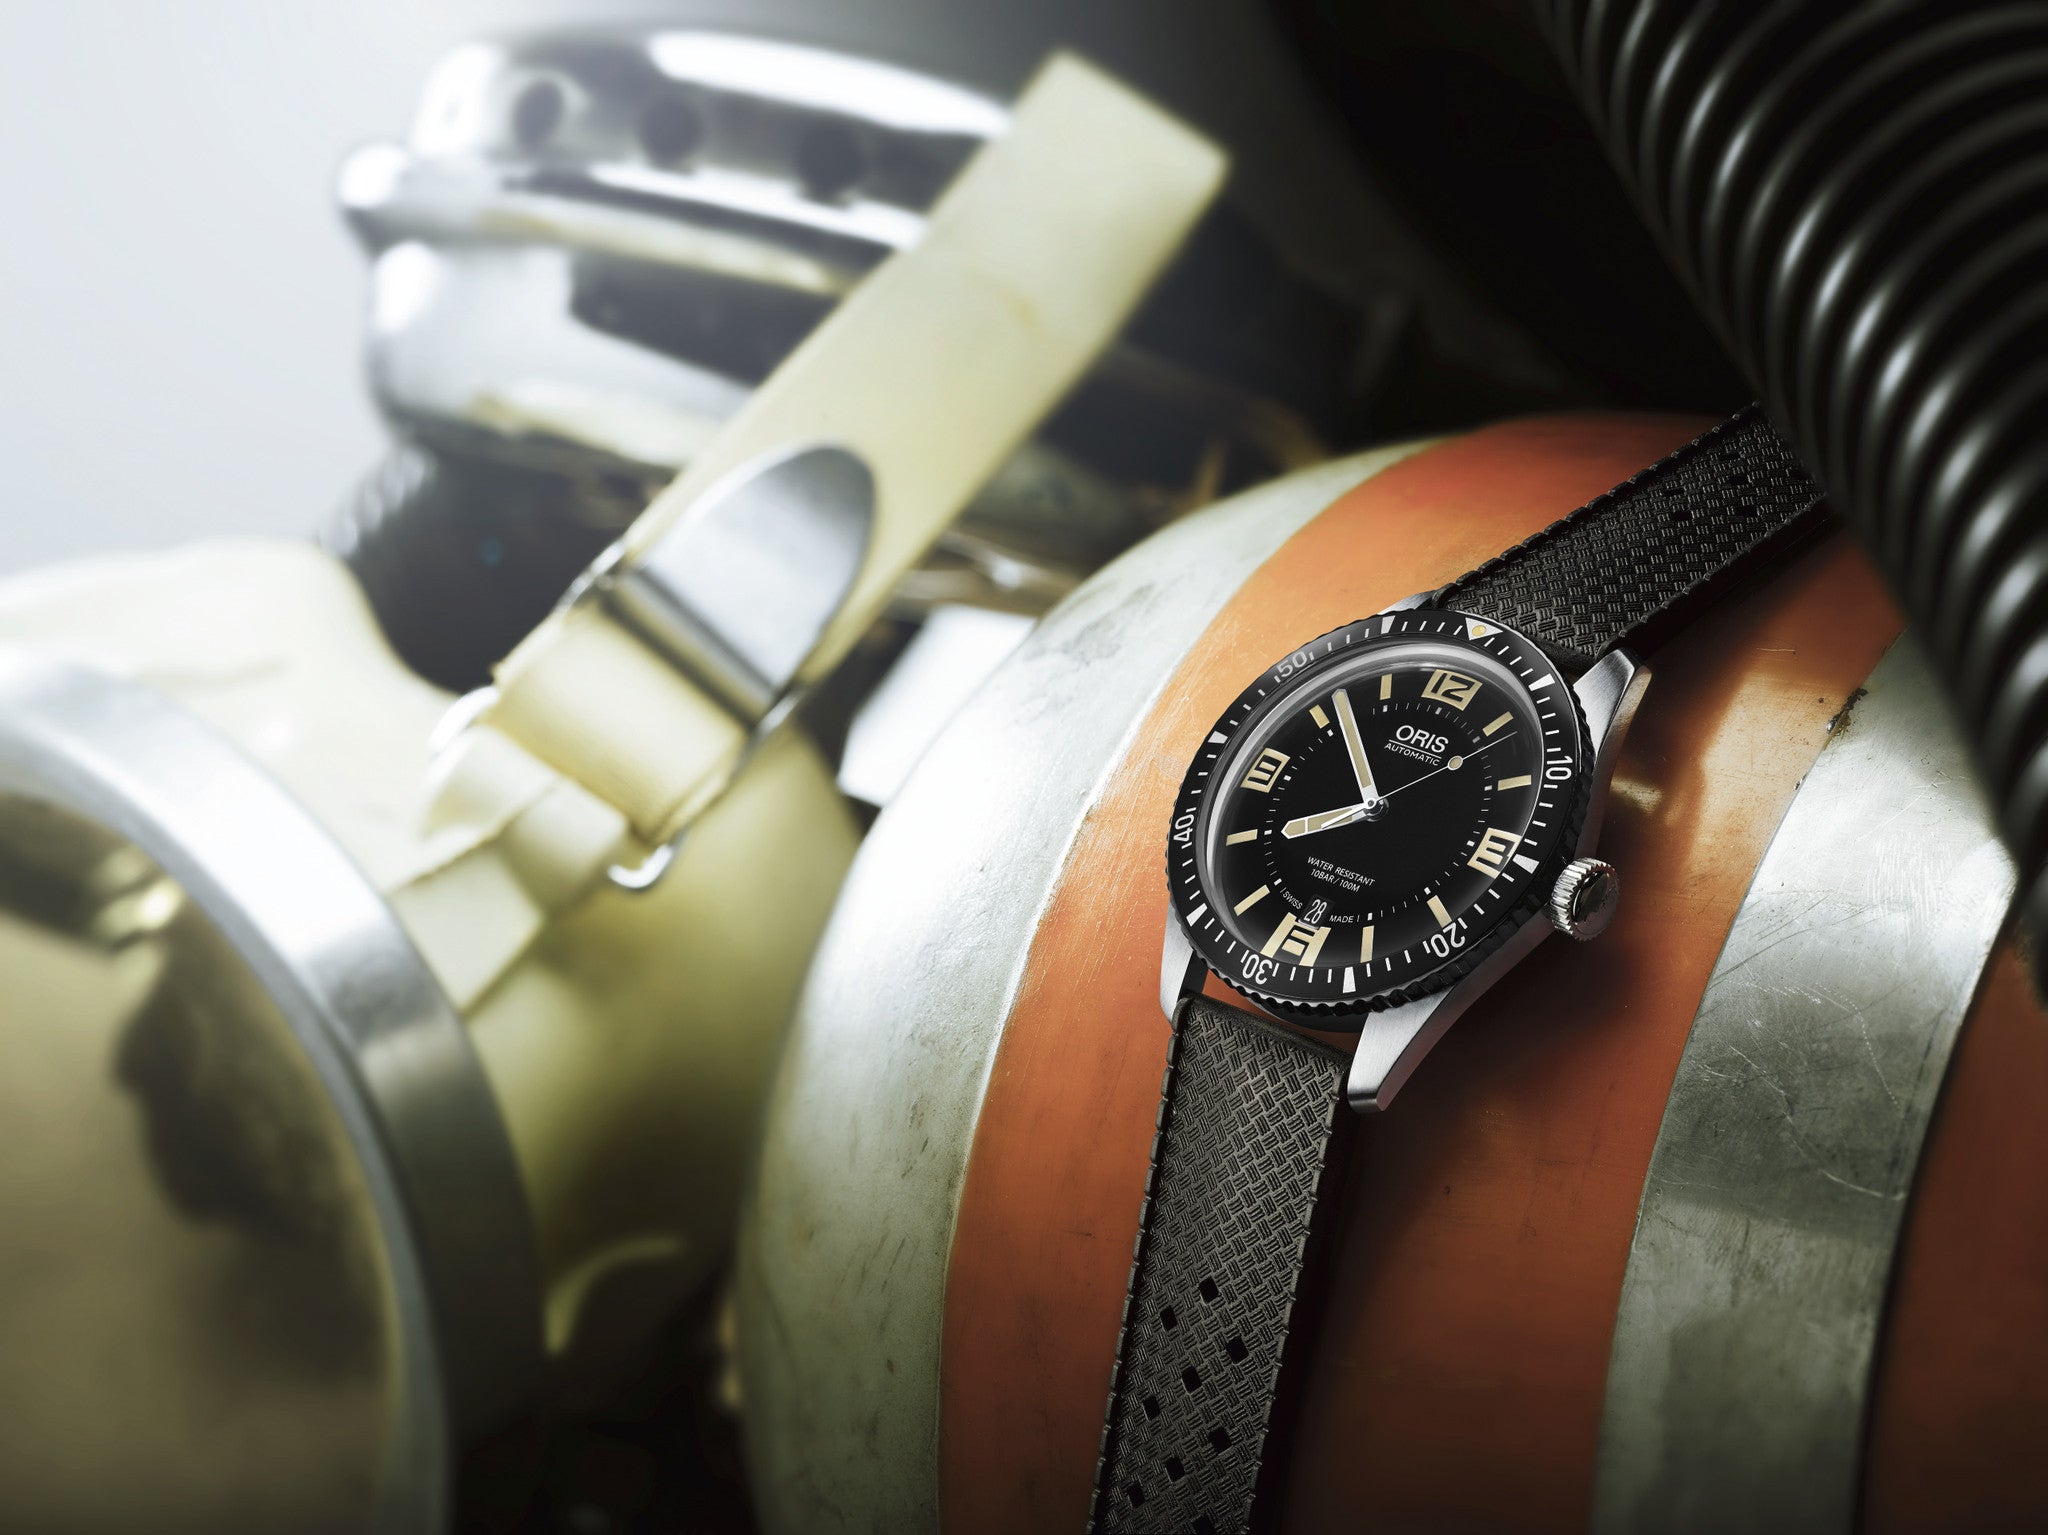 Retro Vibe Delivered: The Oris Sixy-Five 65 Diver Watch